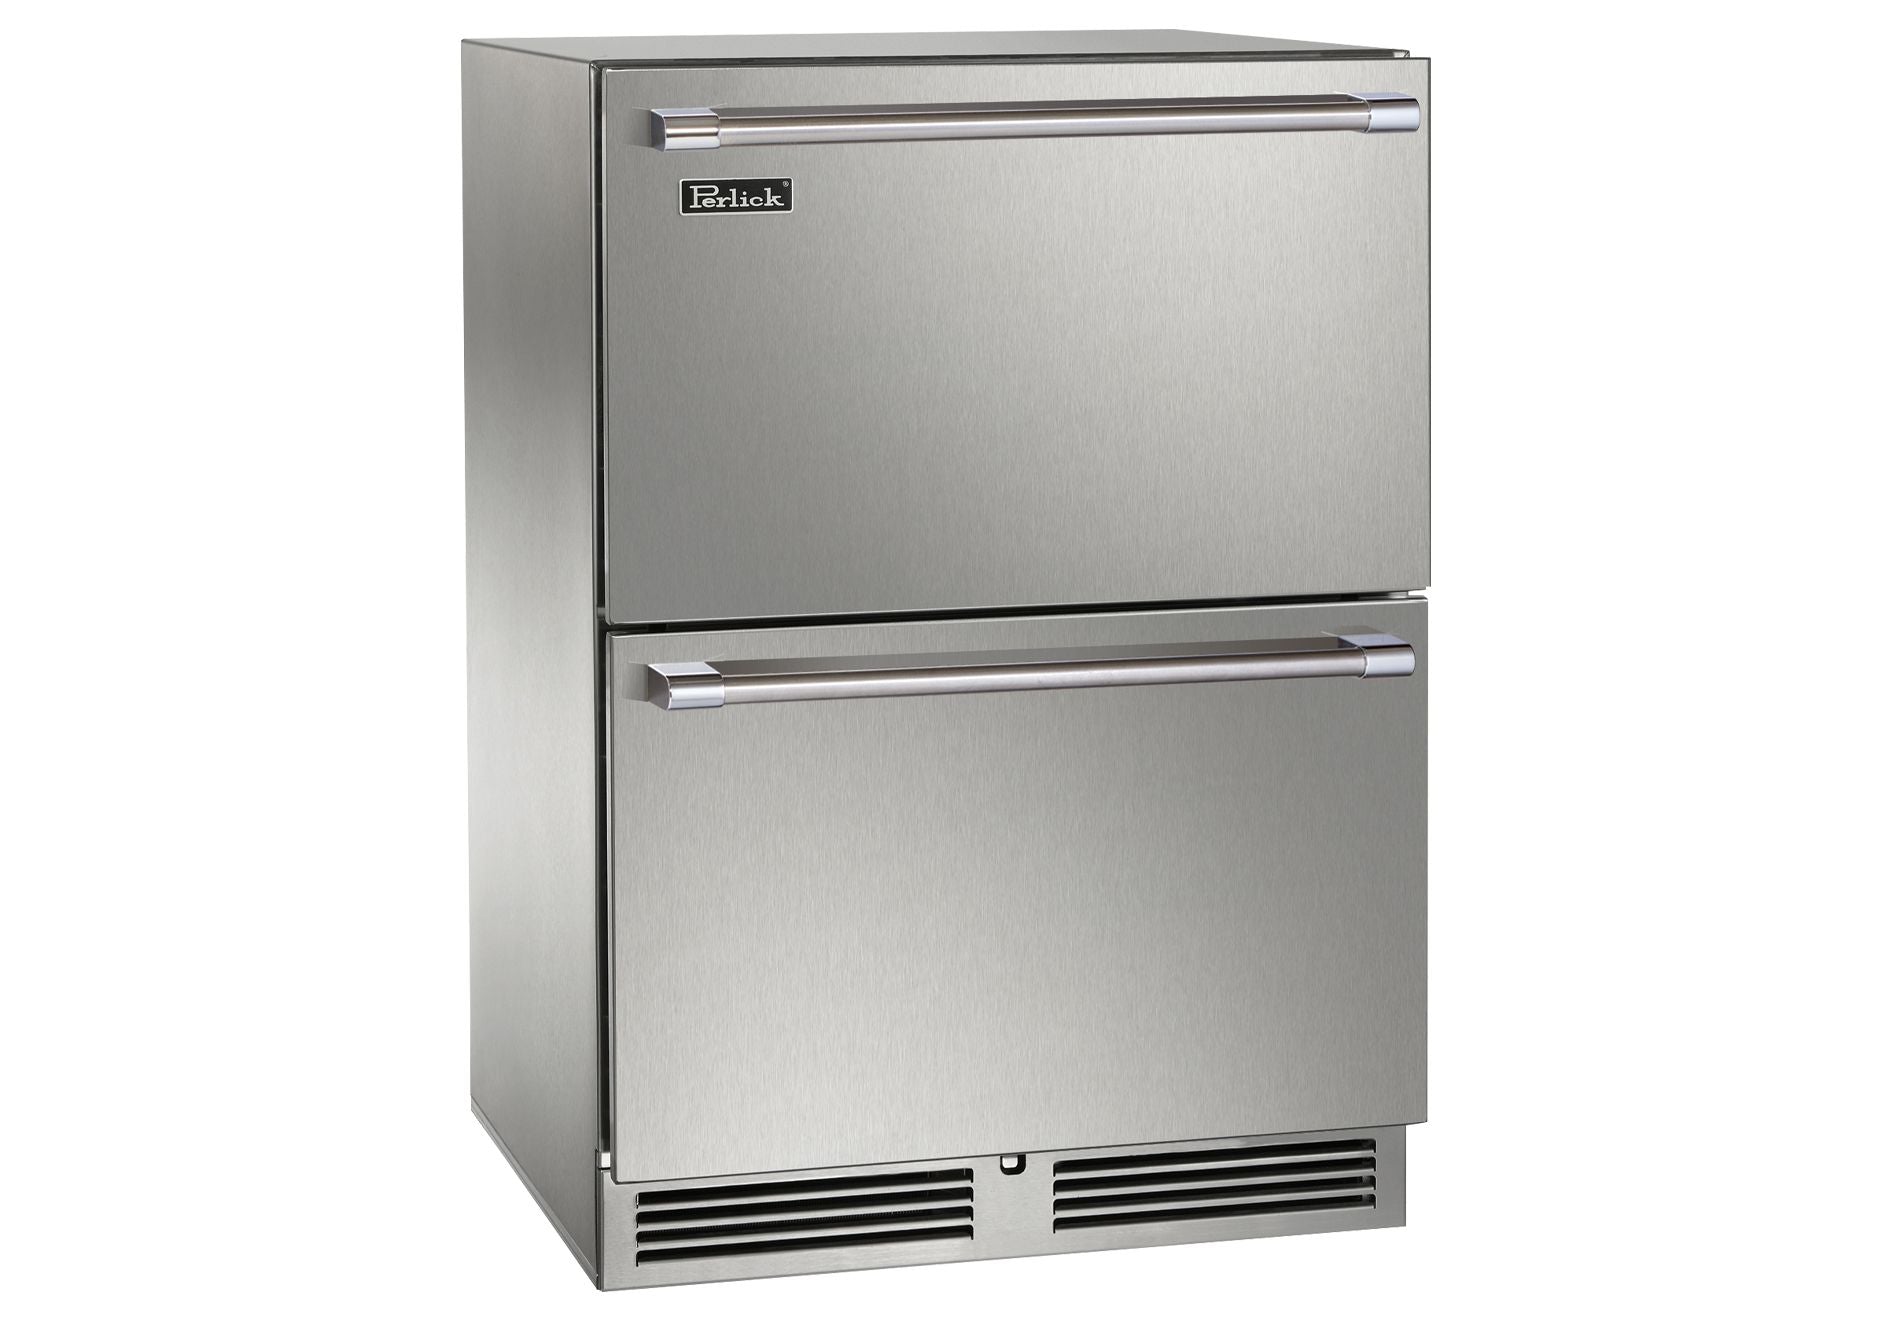 Perlick - 24" Signature Series Marine Grade Dual-Zone Freezer/Refrigerator Drawers, fully integrated panel-ready, with lock - HP24ZM-4